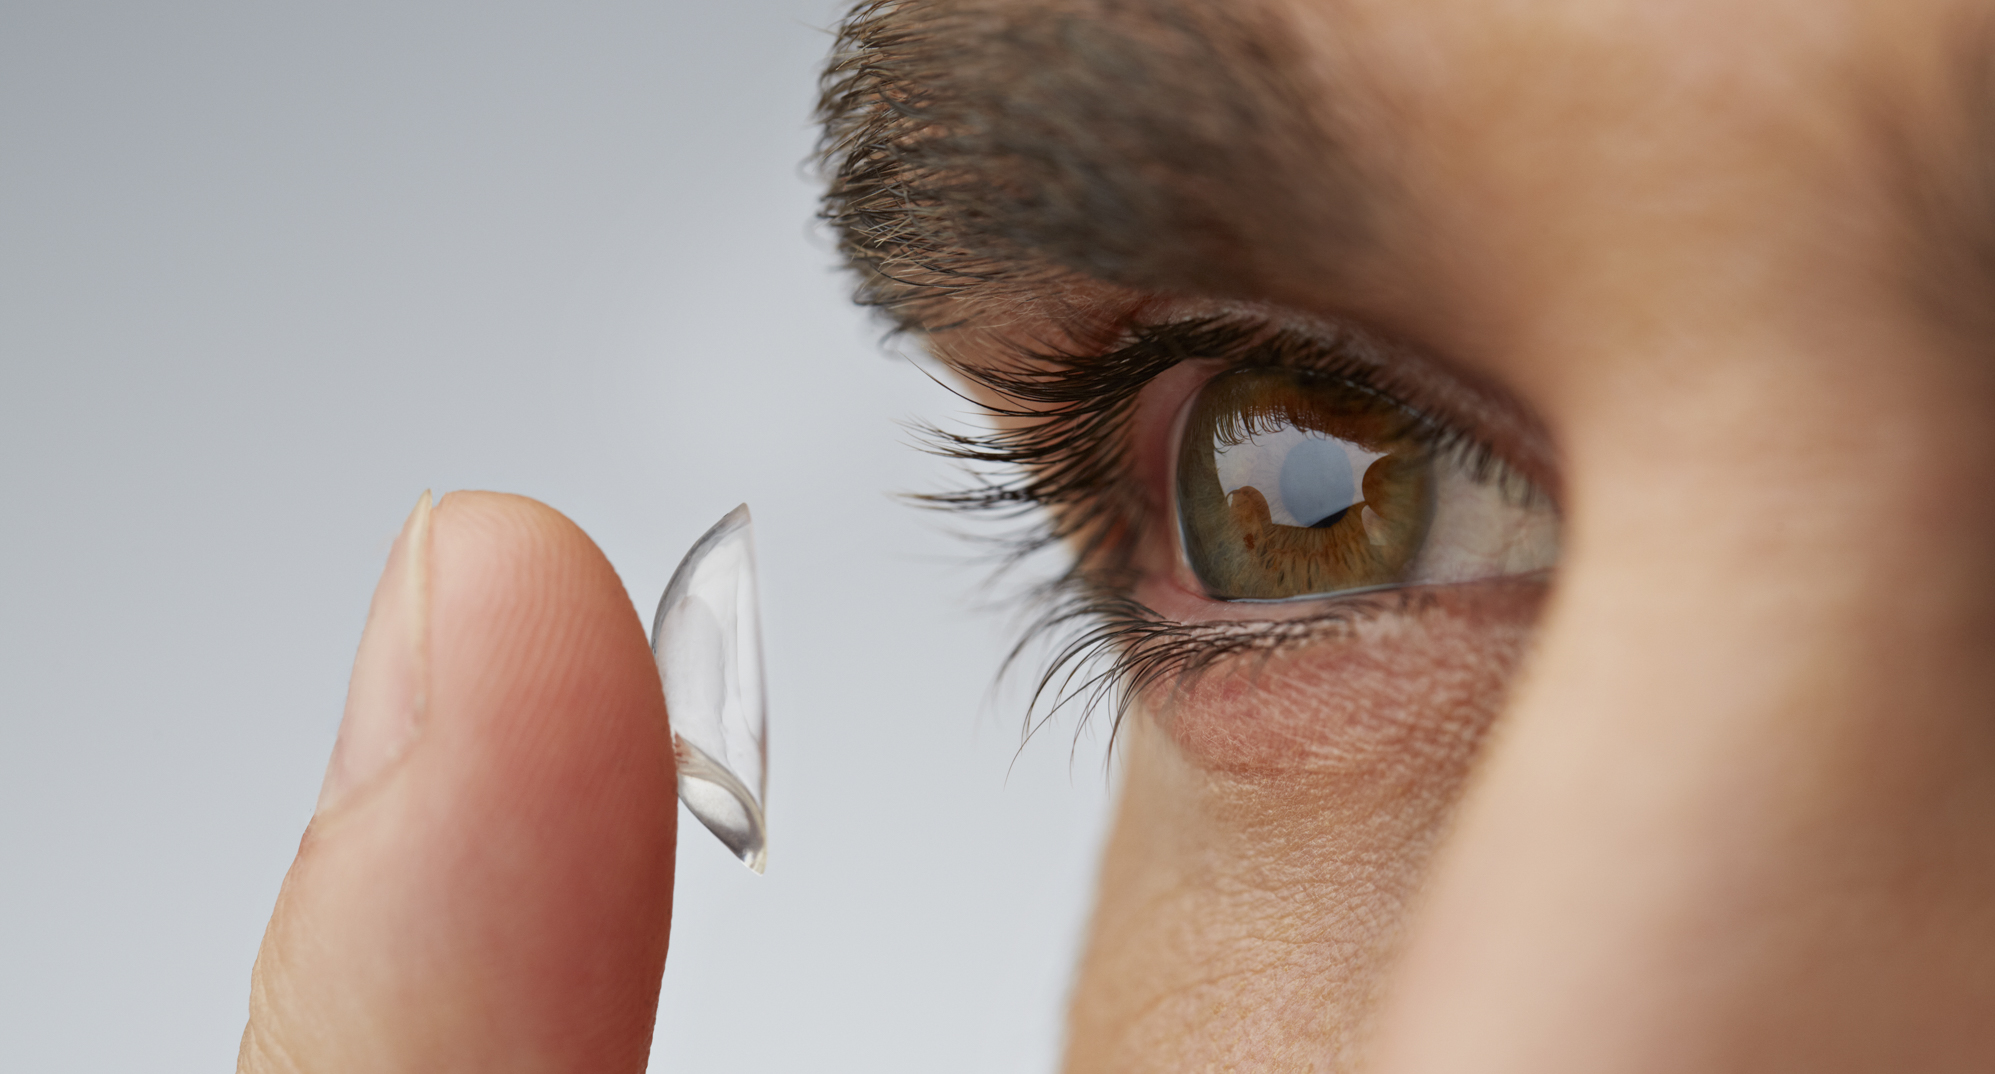 How To Take Care Of Contact Lens Optometrist Optical Shop